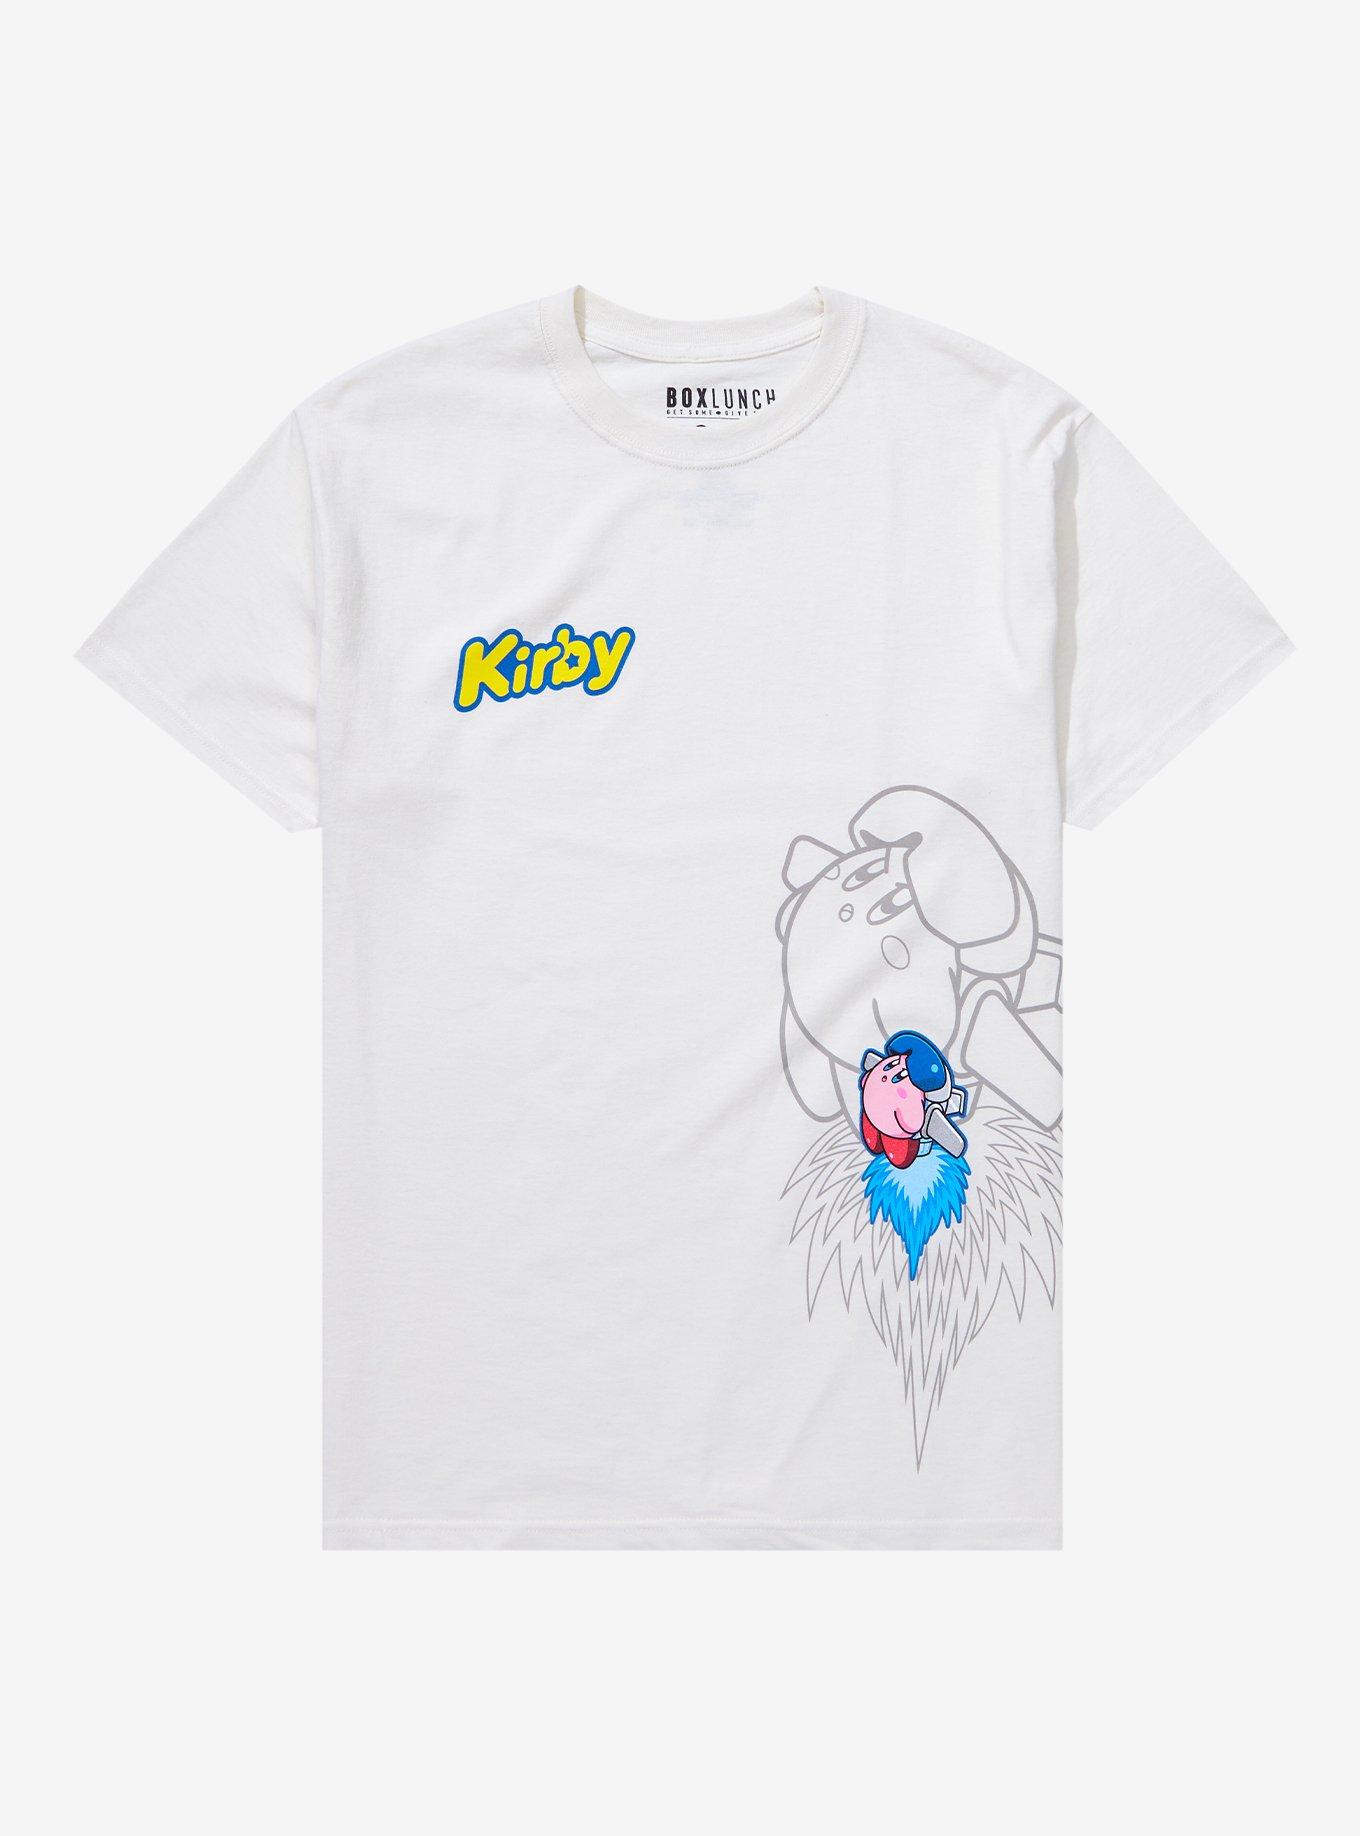 Nintendo Kirby Jetpack Outline T-Shirt - BoxLunch Exclusive | BoxLunch